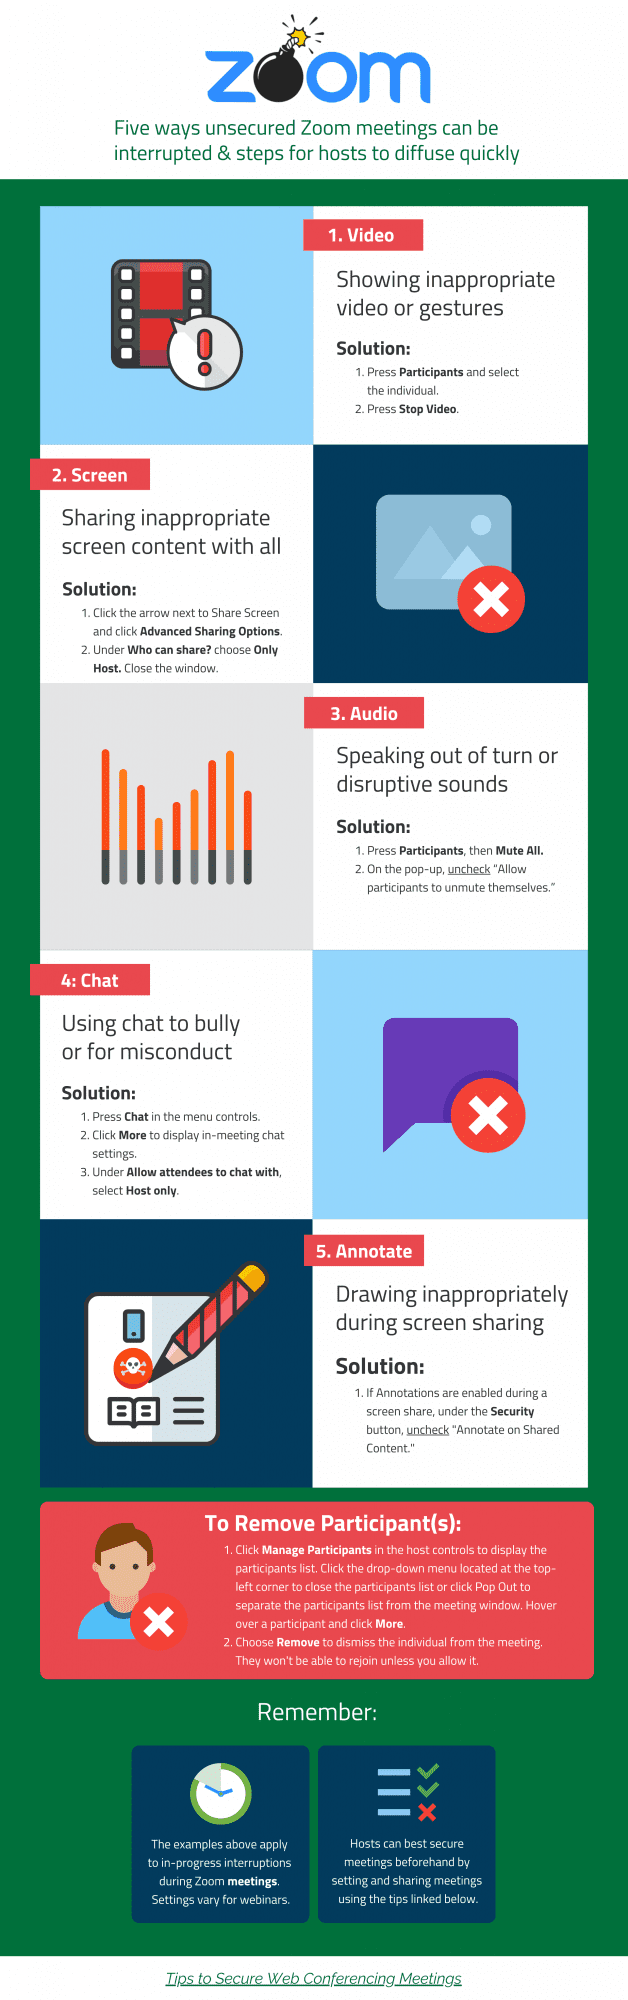 Infographic for ways to stop Zoom interruption